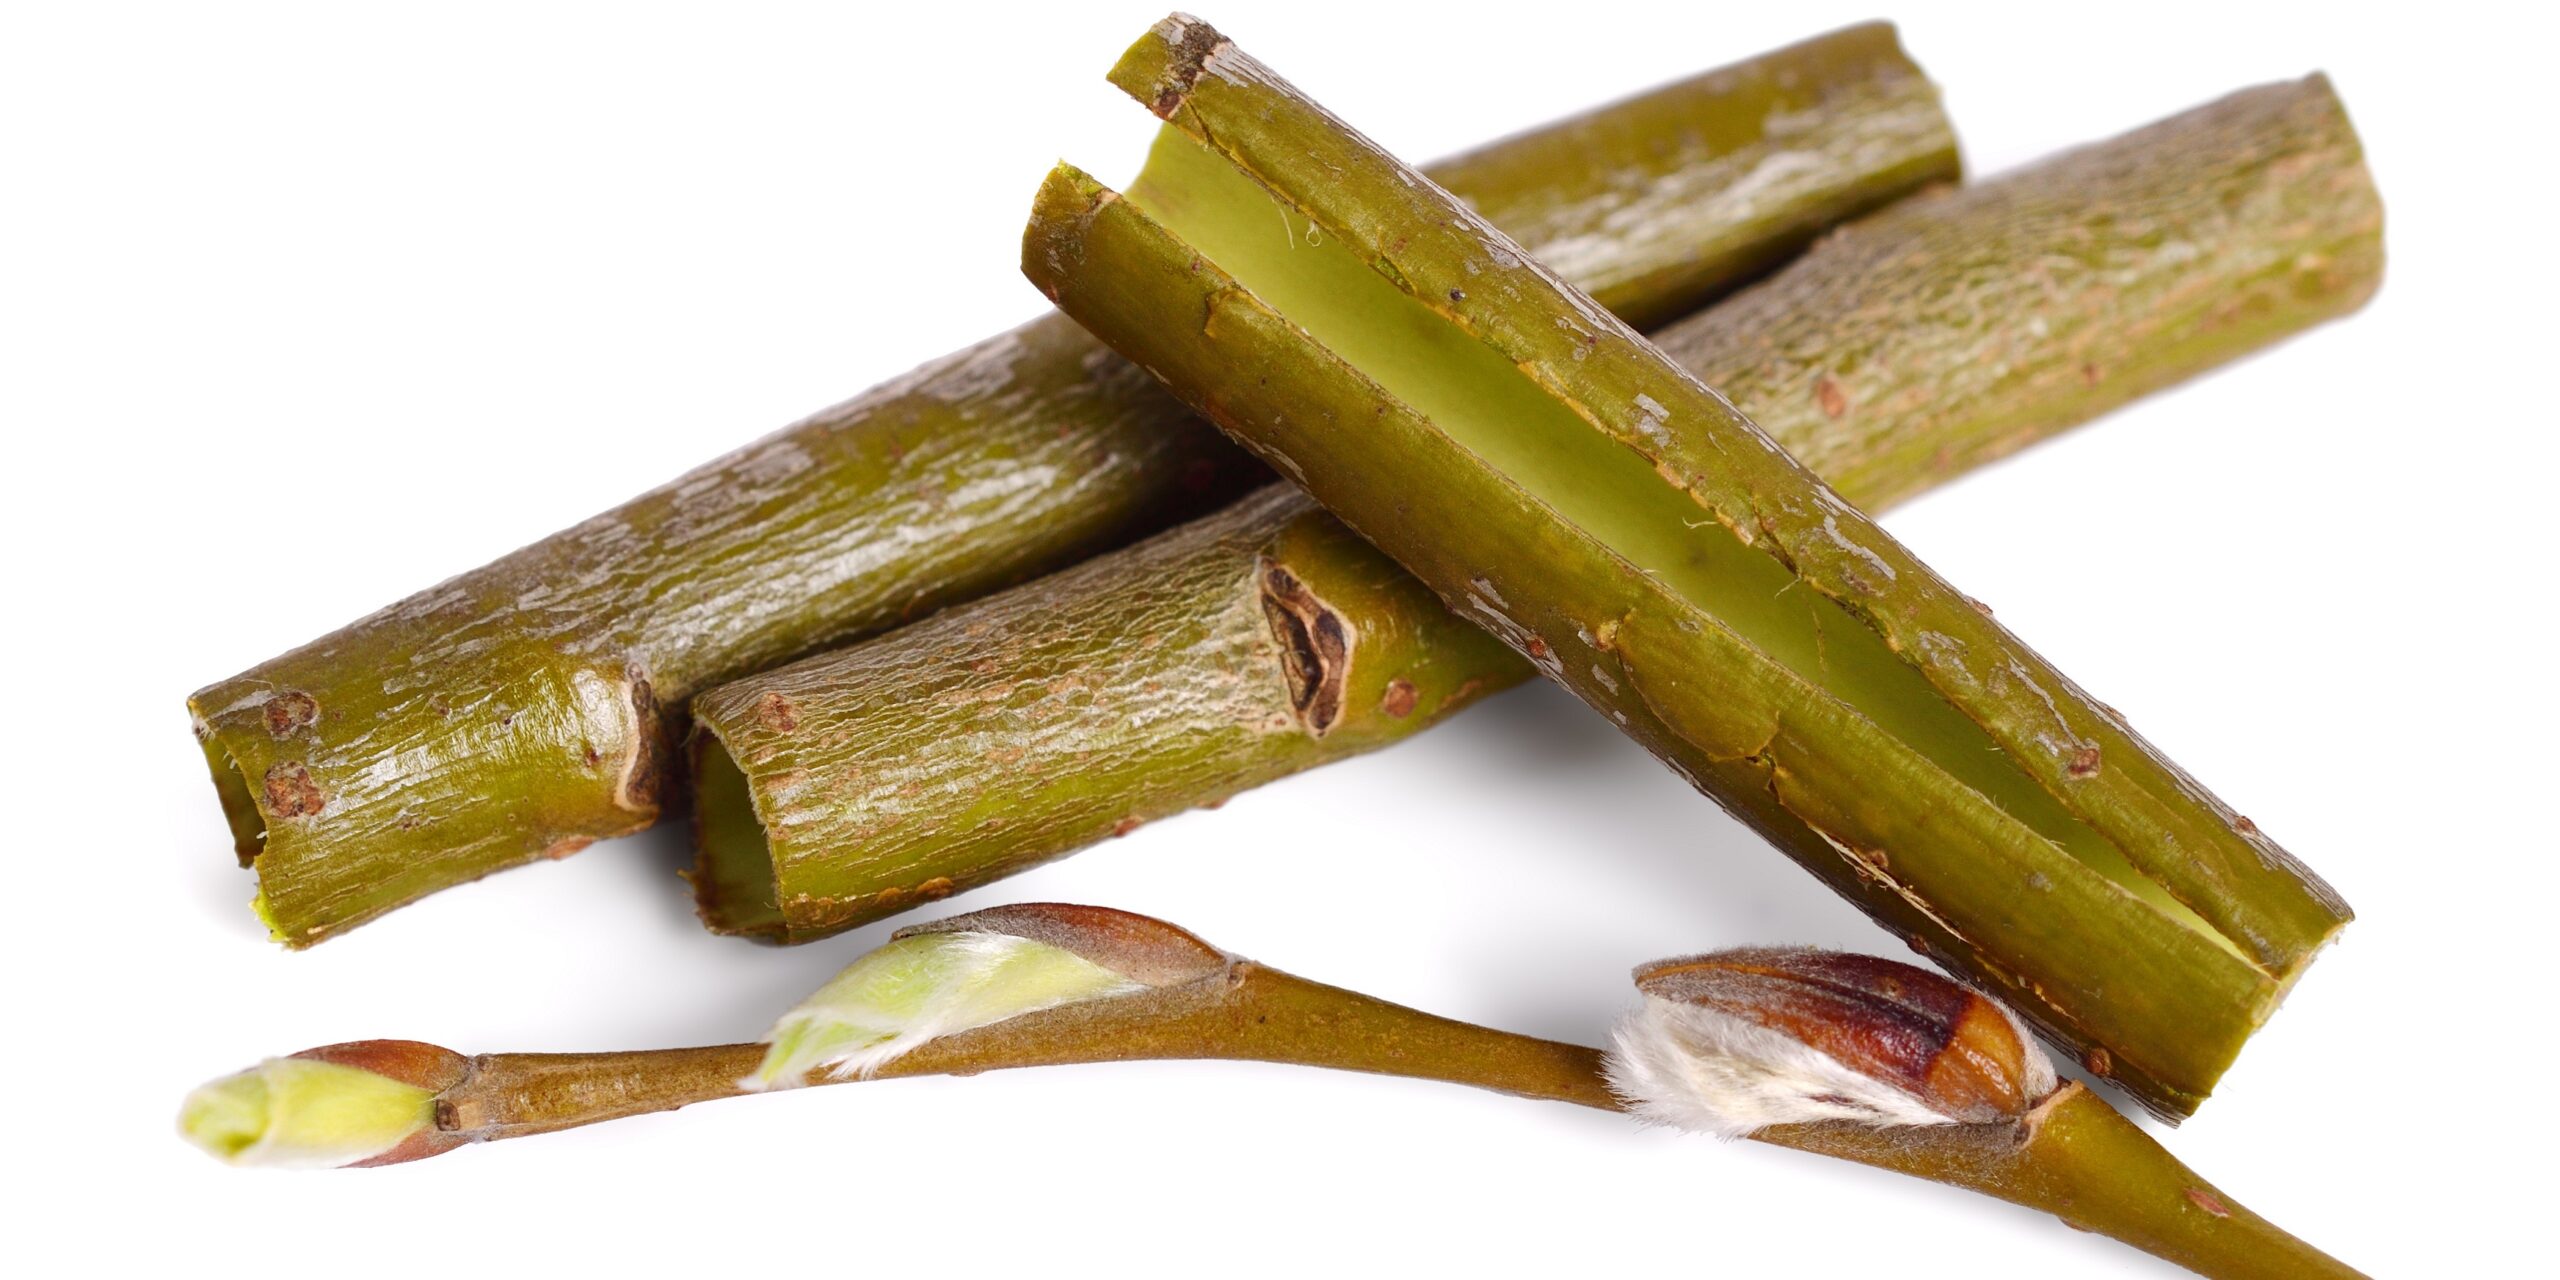 Willow bark extract is effective against viruses